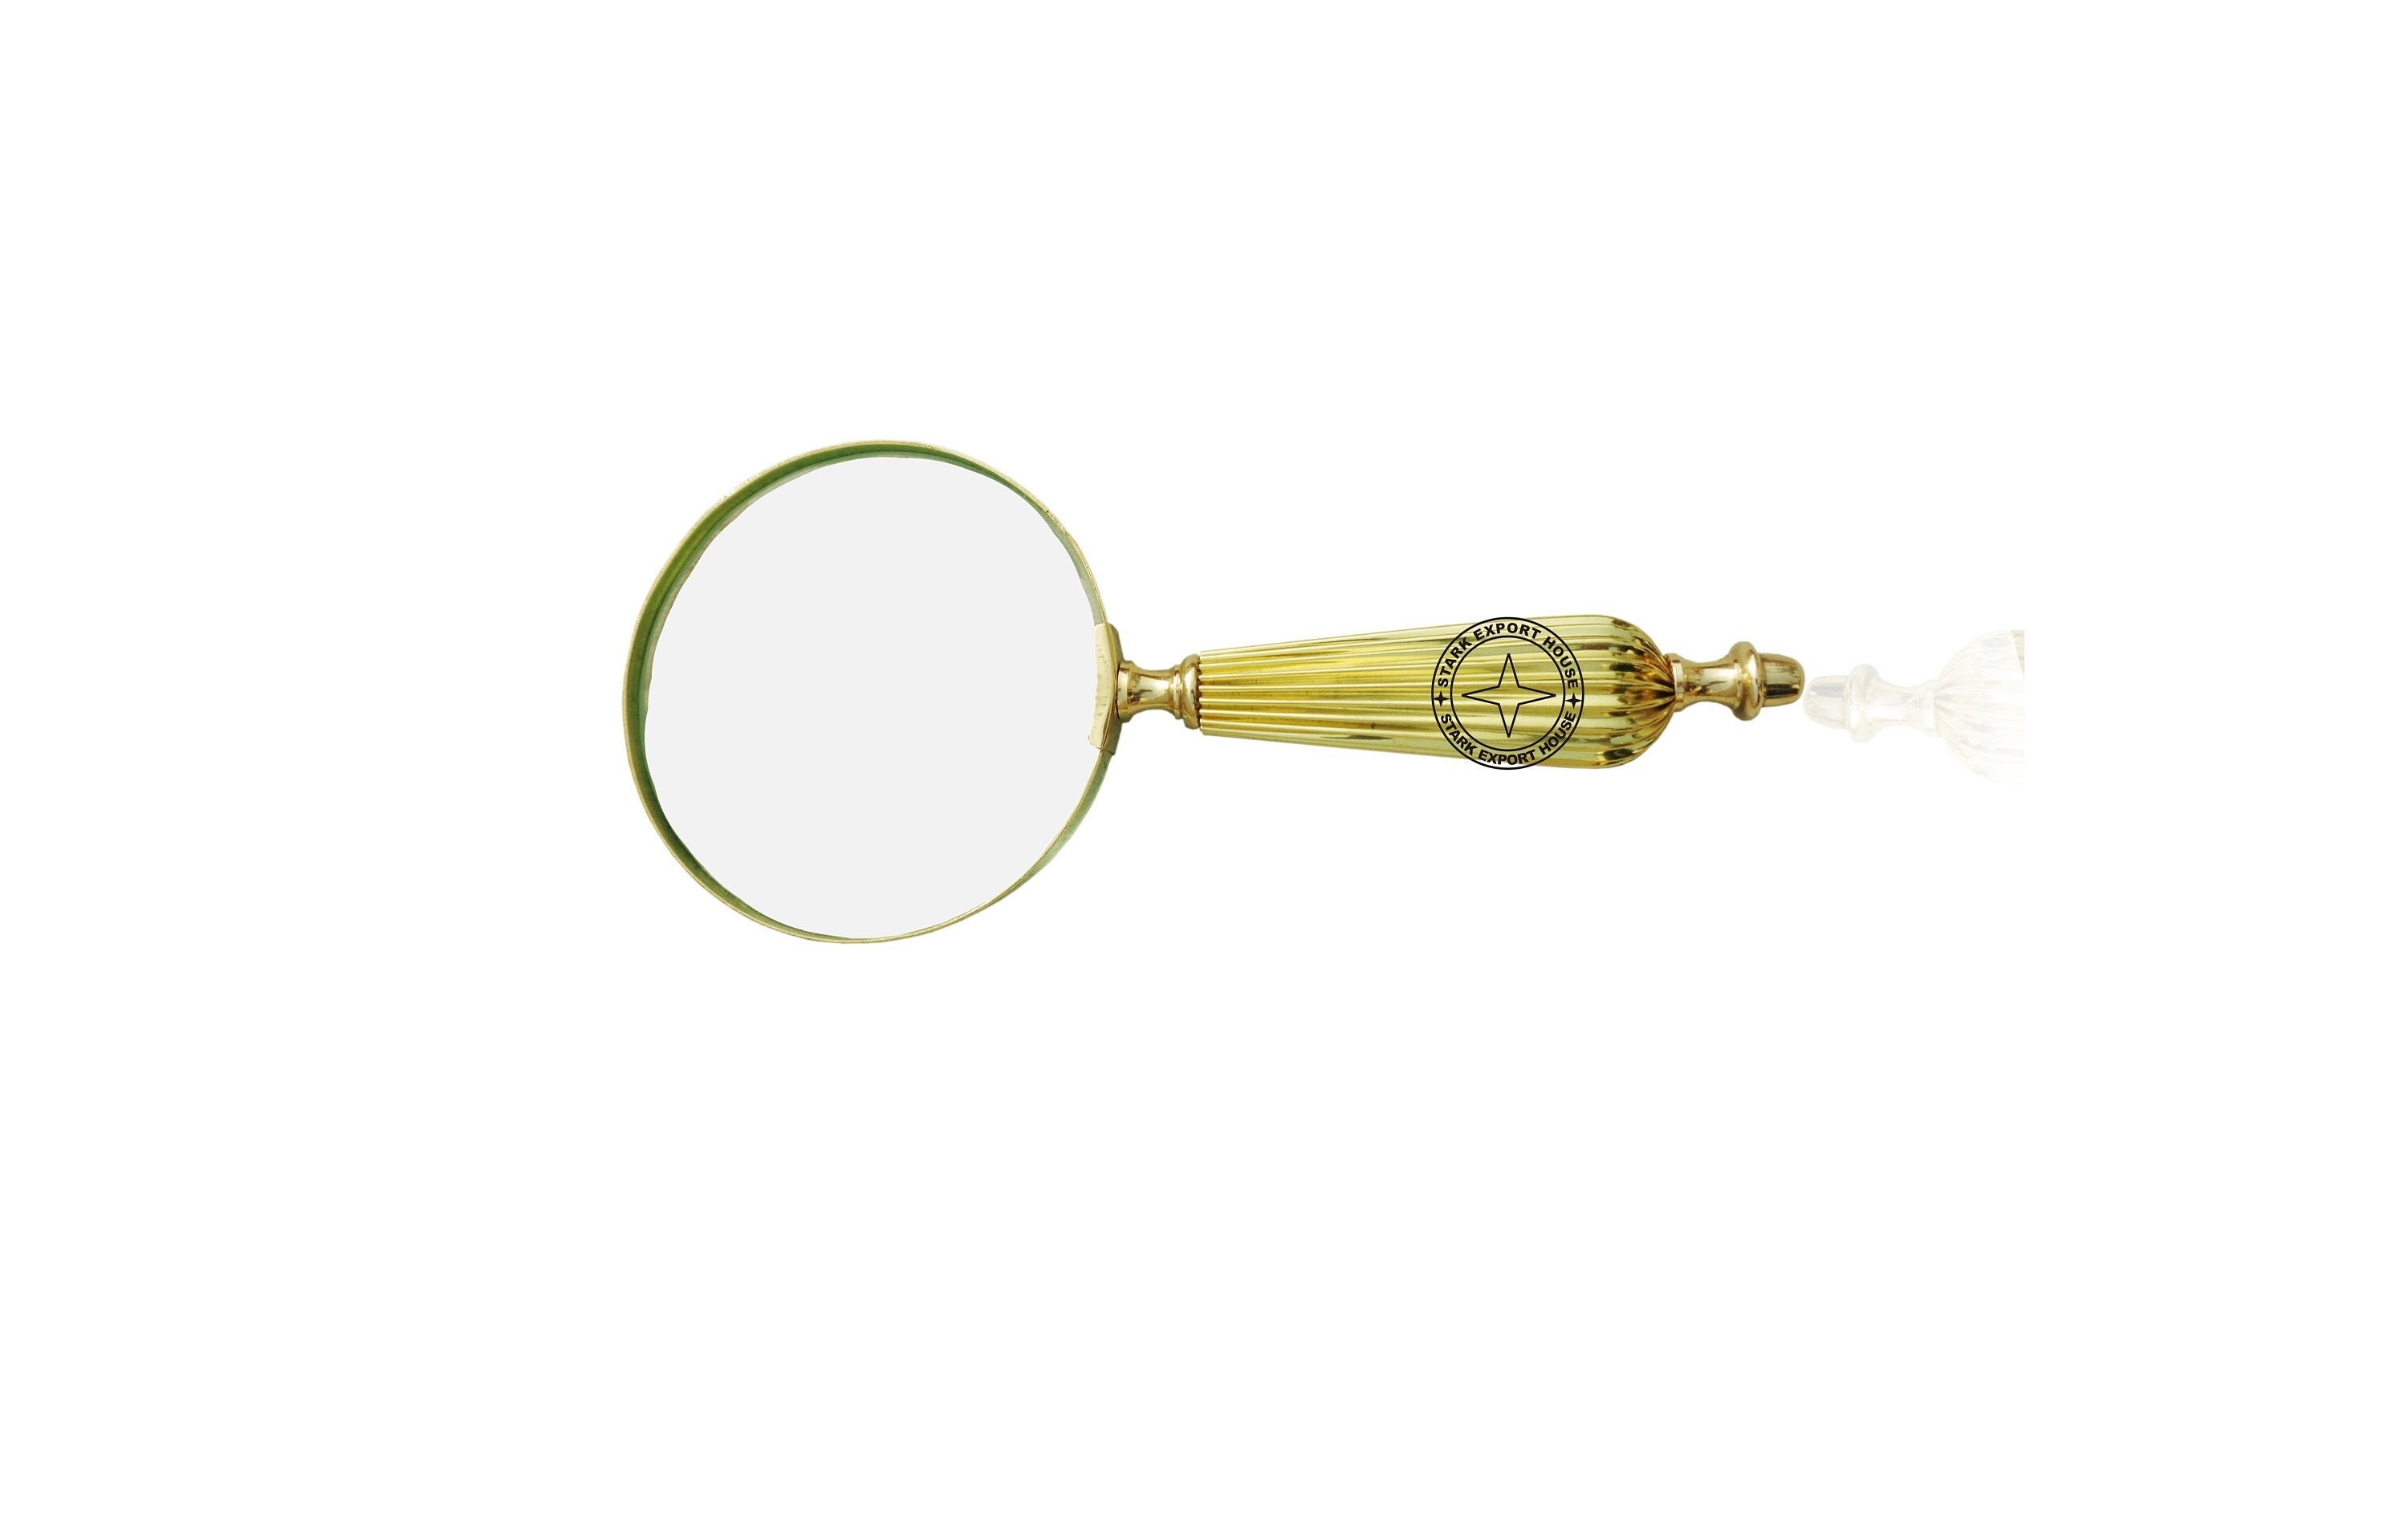 Double Glass High Power Antique Handheld Magnifier Magnifying Glass for  Reading, Soldering, Jewelries, Maps, Great for Gifting 